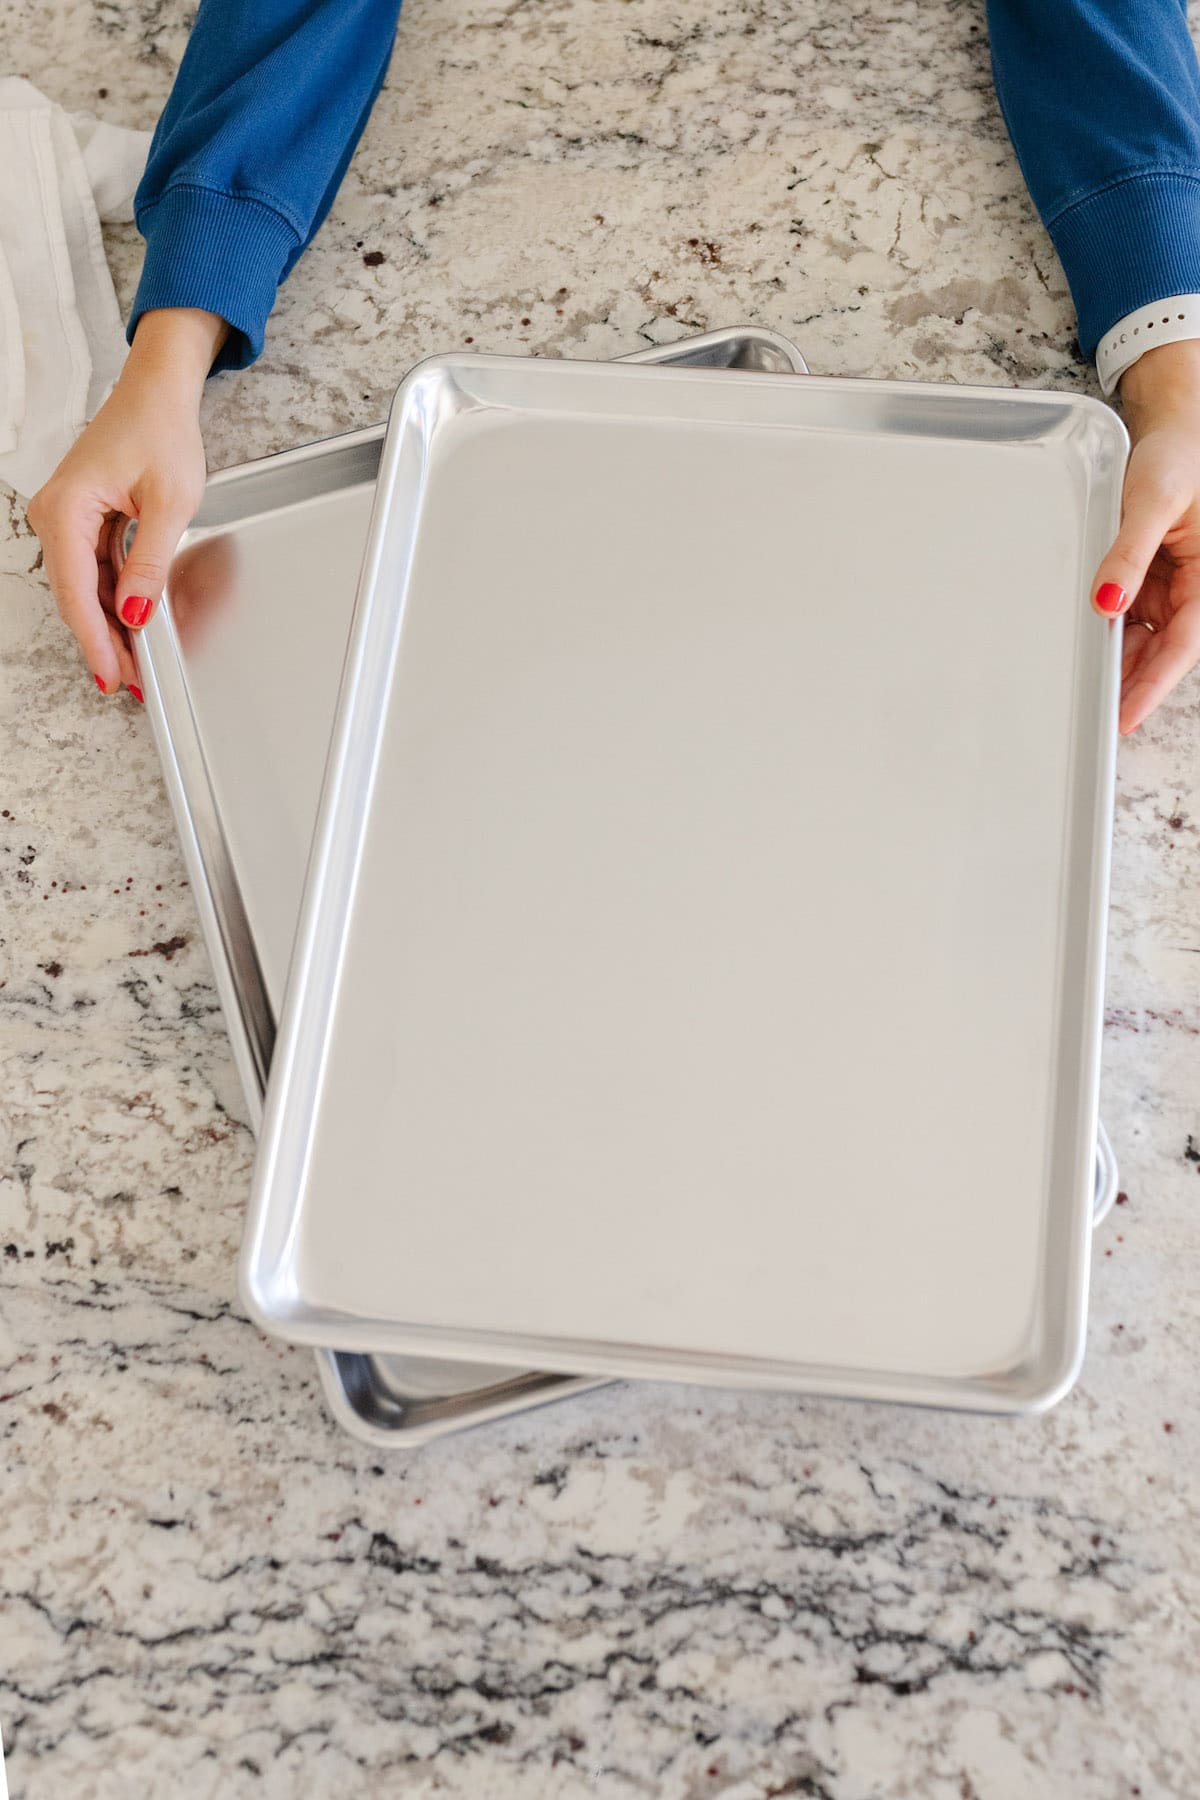 Light-colored sheet pans for baking cookies